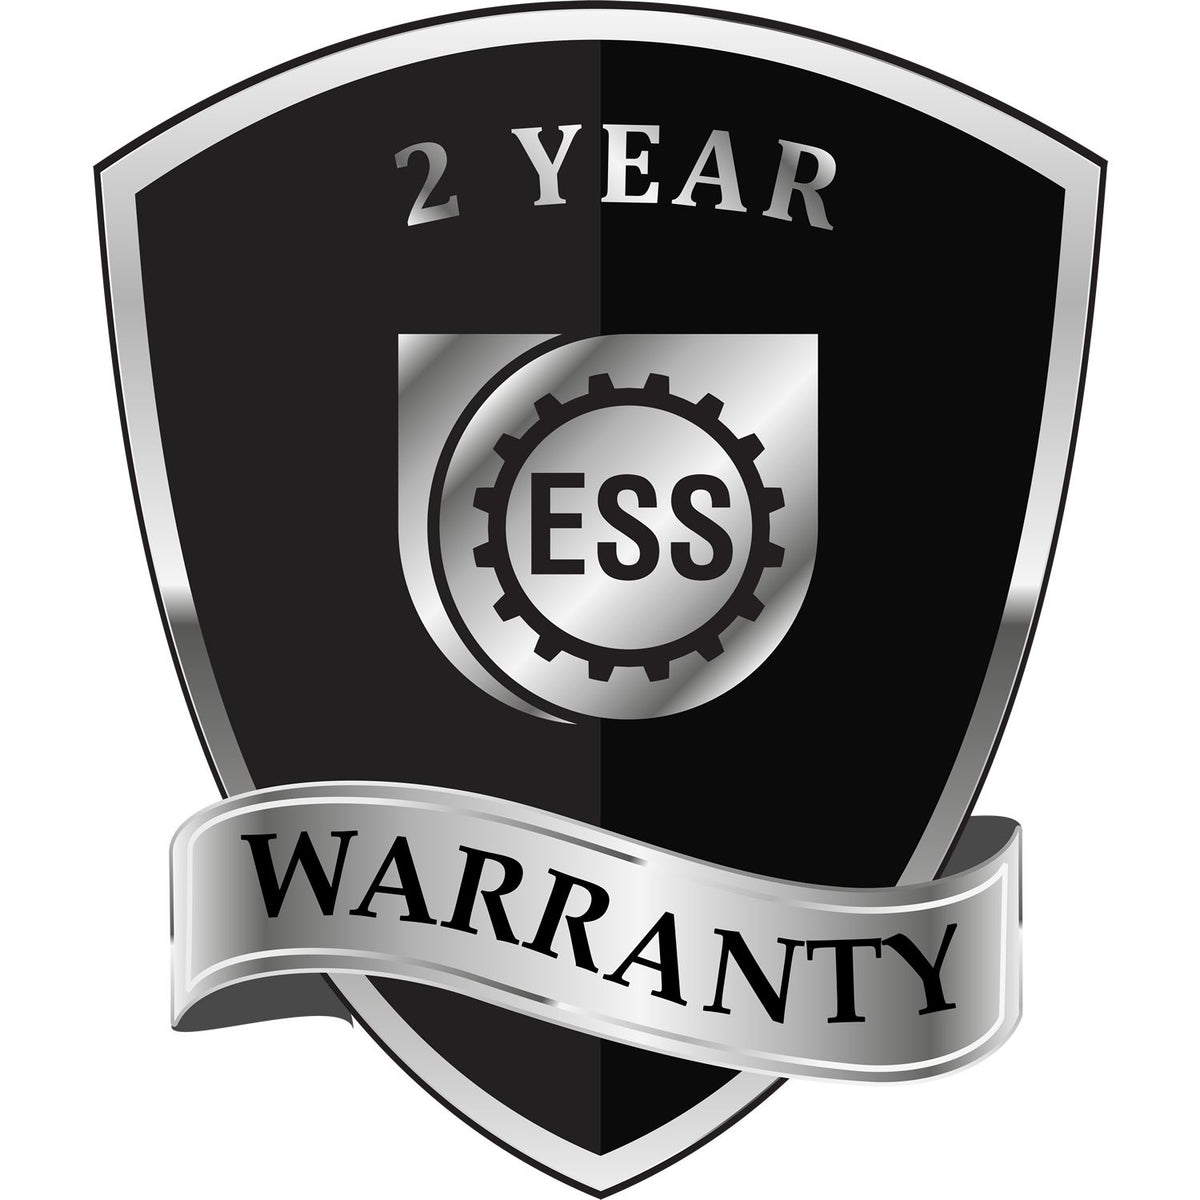 A black and silver badge or emblem showing warranty information for the Gift Hawaii Landscape Architect Seal